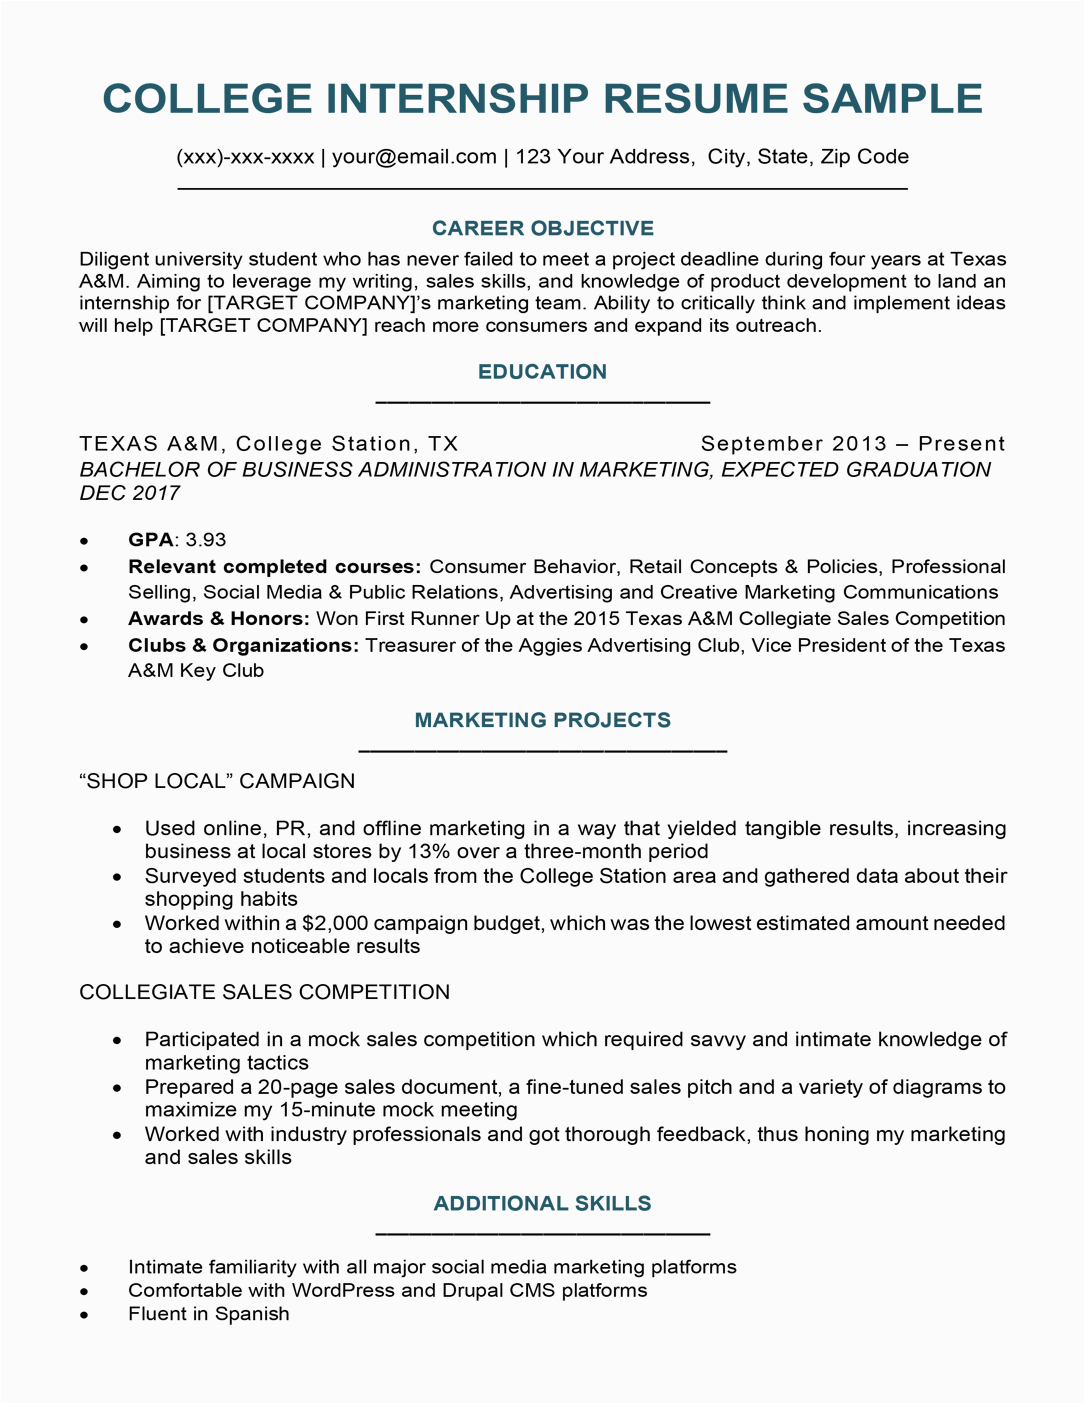 Sample Resume Summary for College Student College Student Resume Sample & Writing Tips